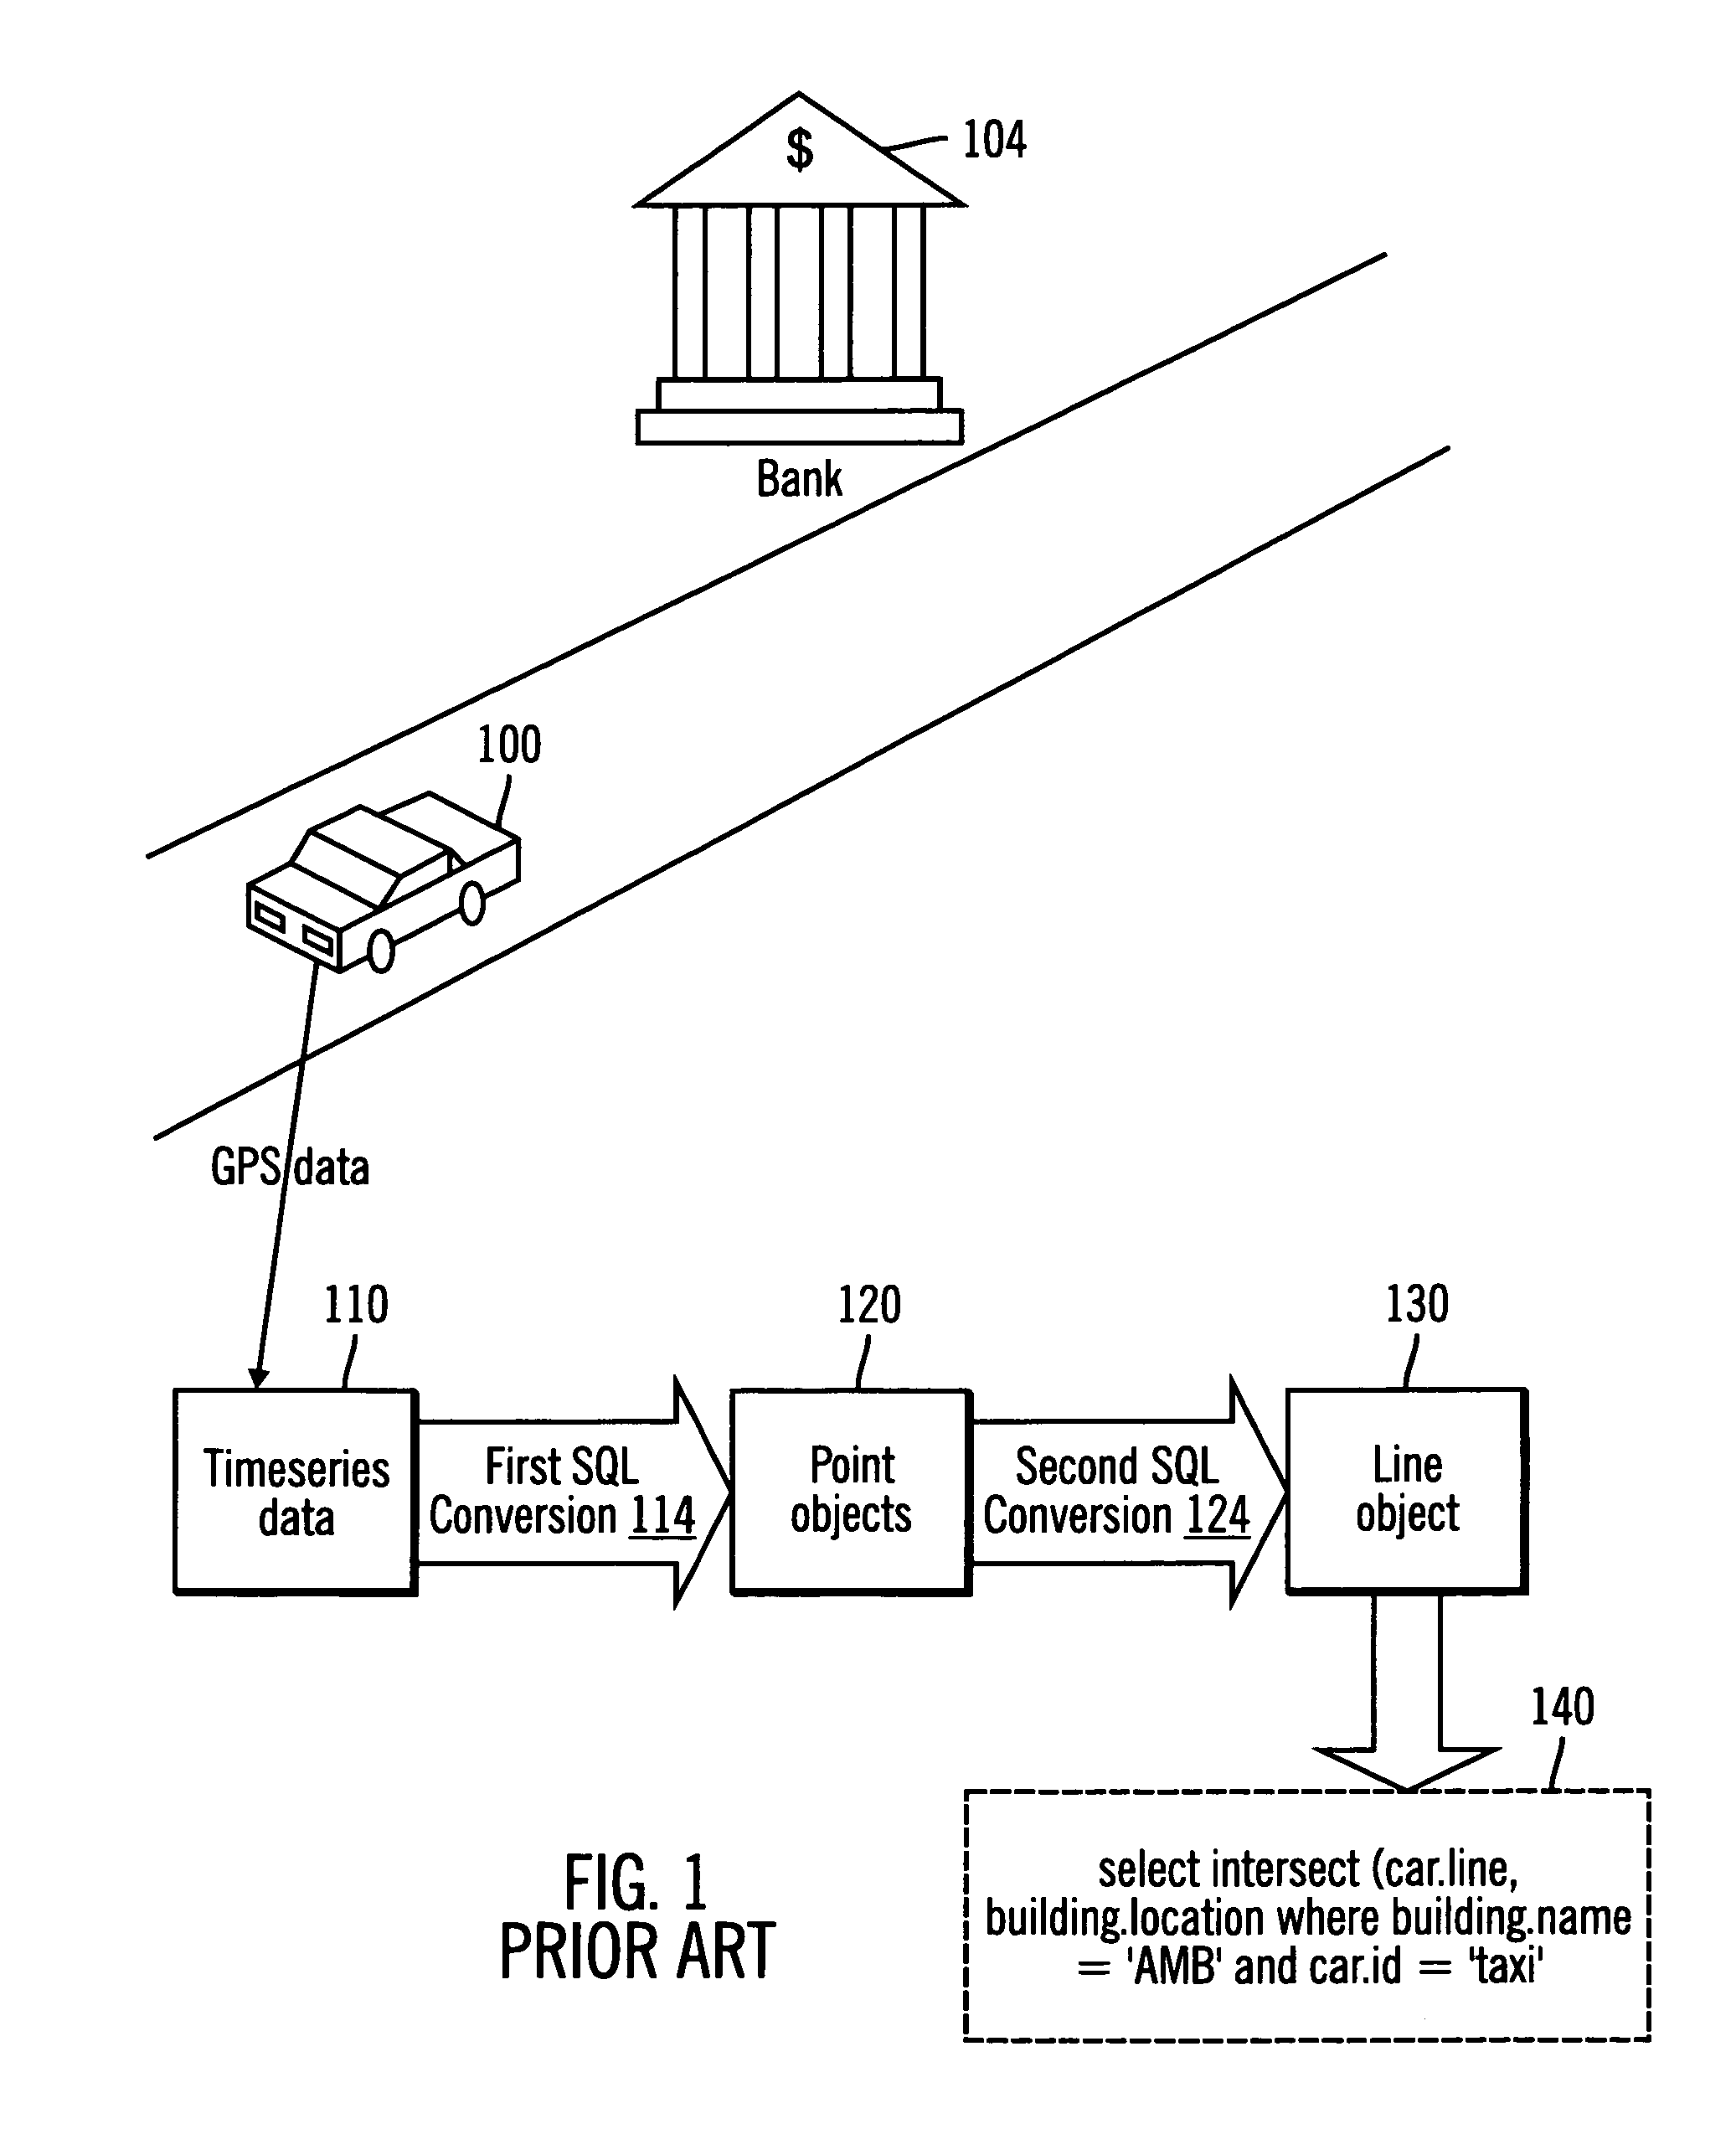 Method for optimization of temporal and spatial data processing